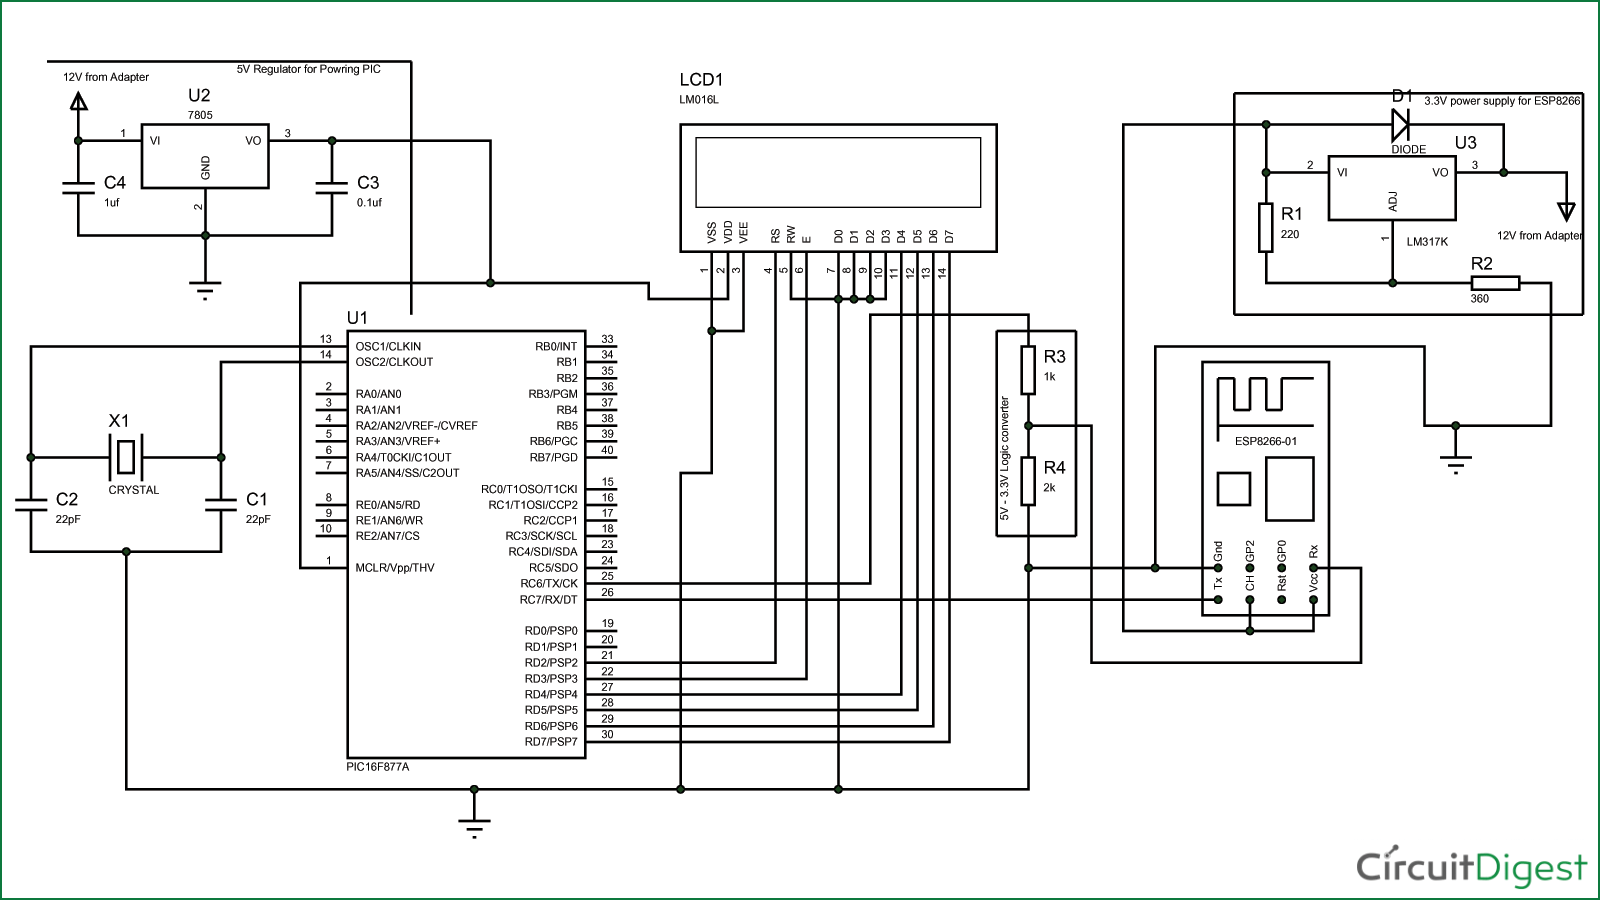 Circuit Diagram for Sending Email using PIC Microcontroller with ESP8266